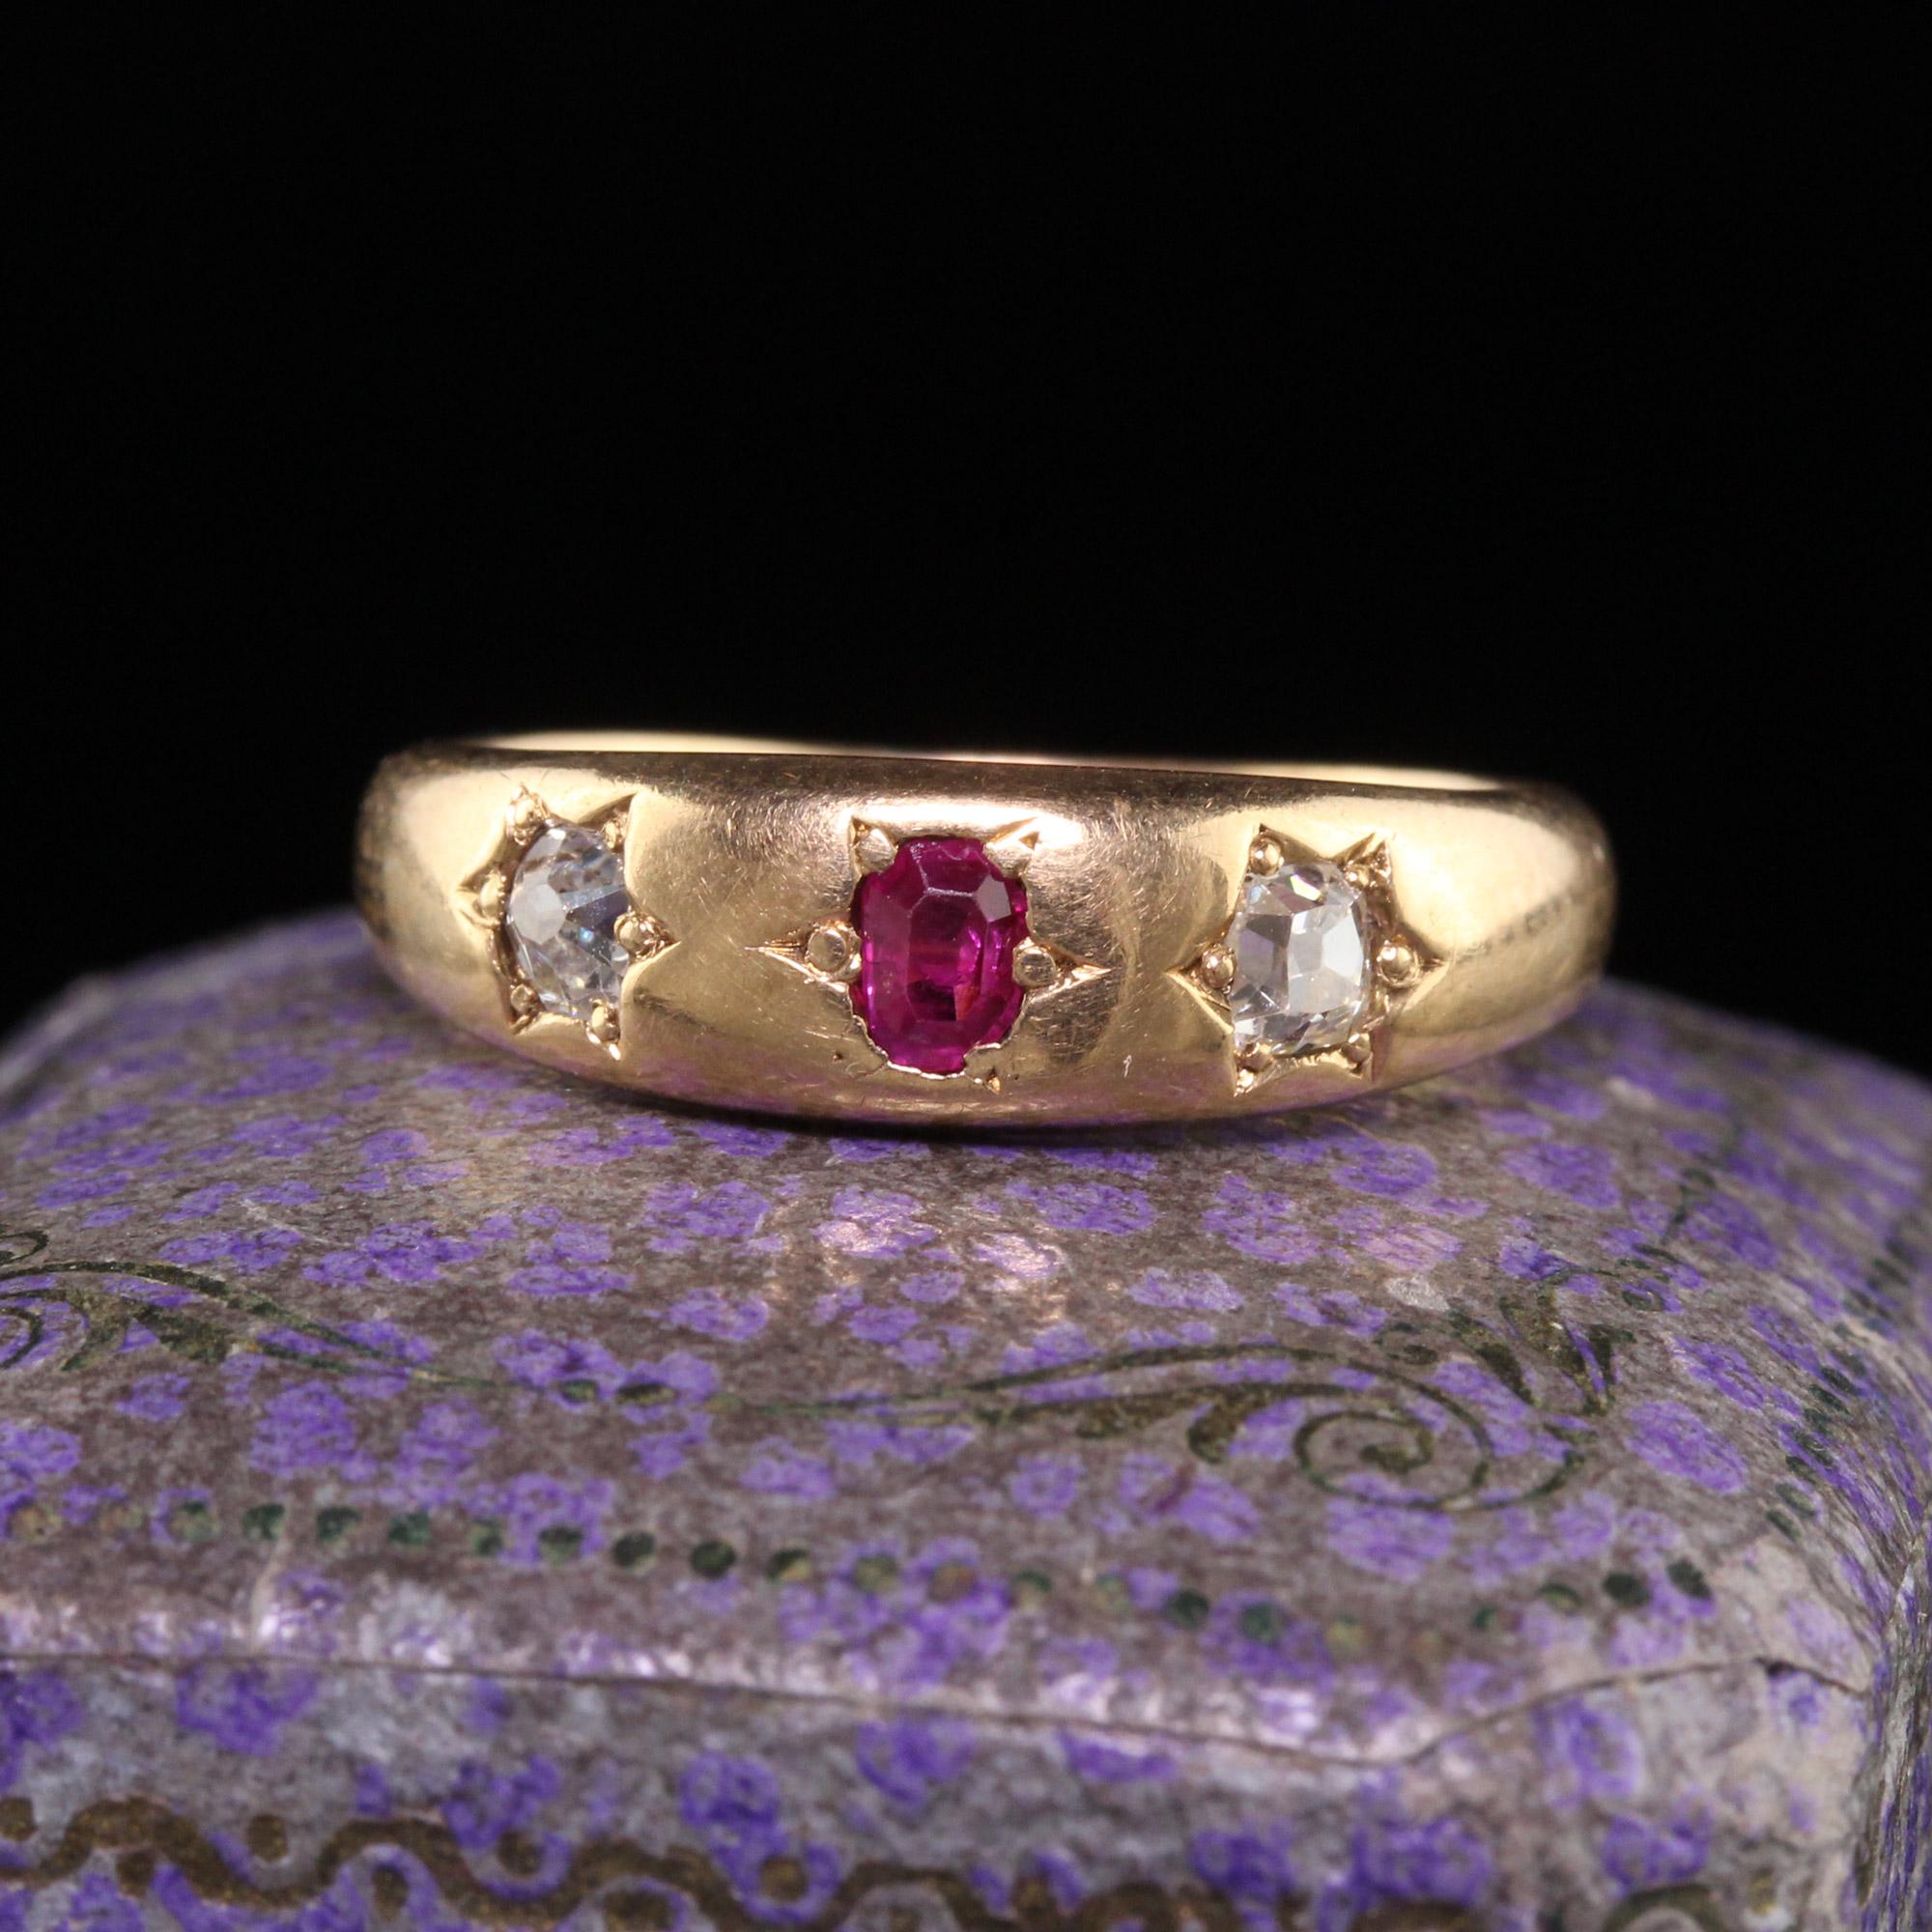 Beautiful Antique Victorian 18K Yellow Gold Old Mine Diamond and Ruby Three Stone Ring. This classic band is crafted in 18k yellow gold. The ring holds two old mine cut diamonds and a natural ruby in the center. The ring is in great condition and